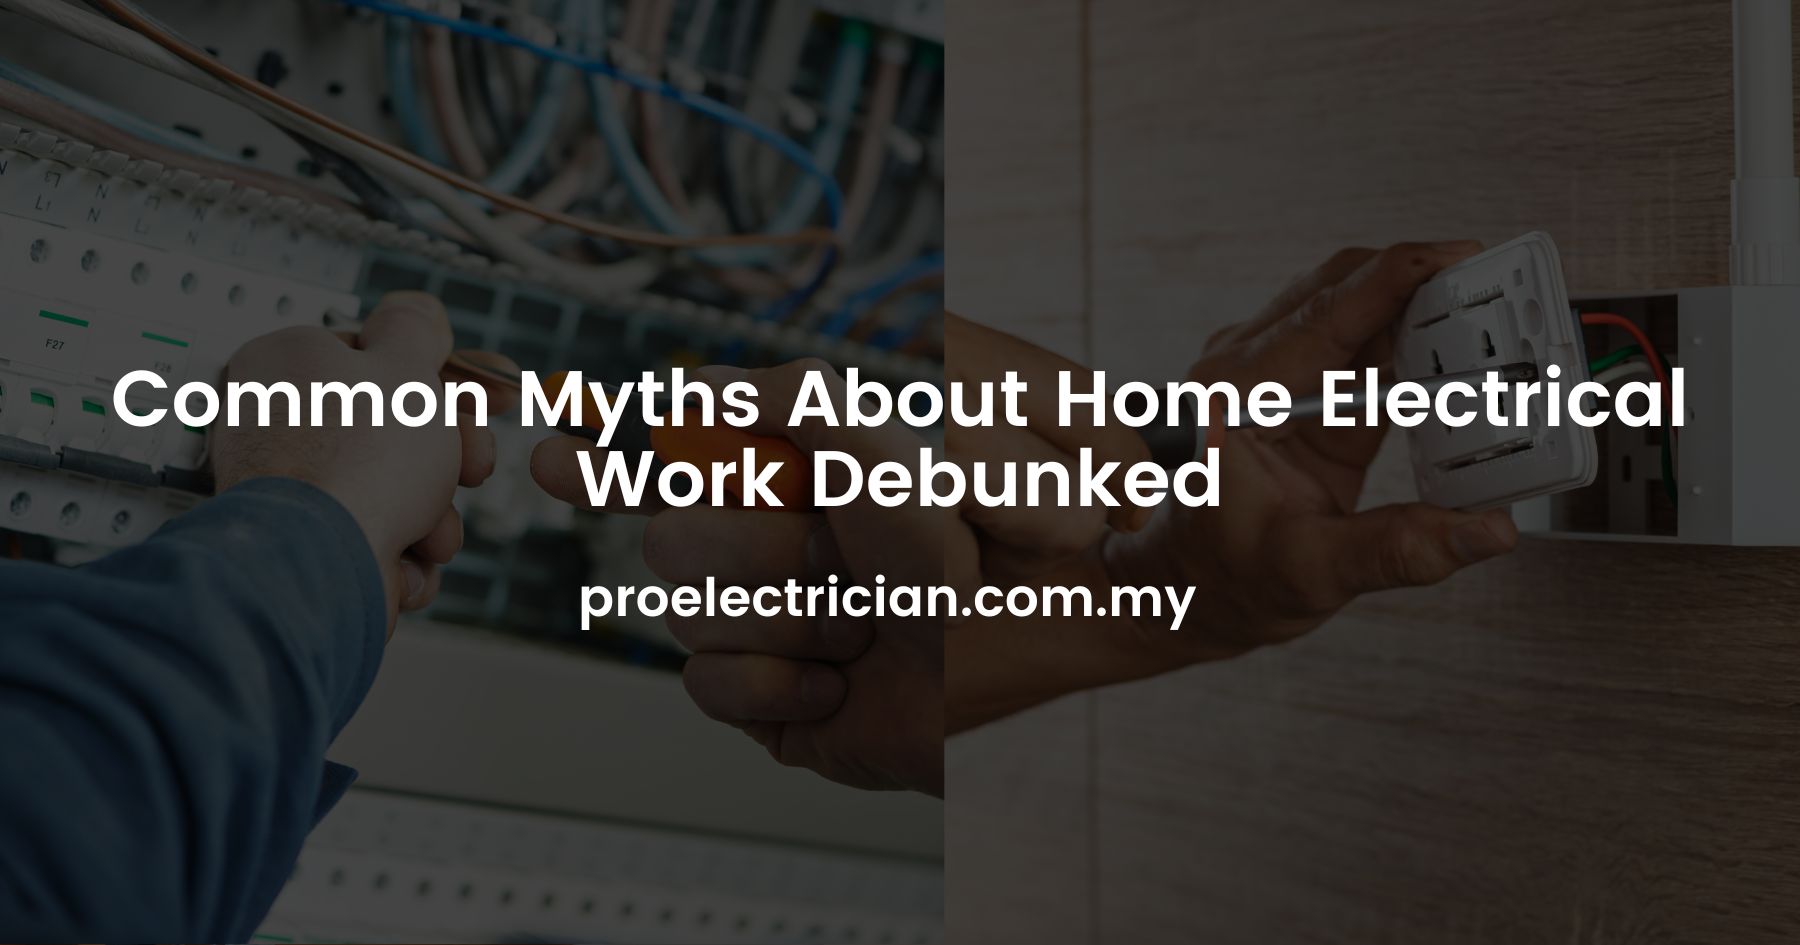 Common Myths About Home Electrical Work Debunked